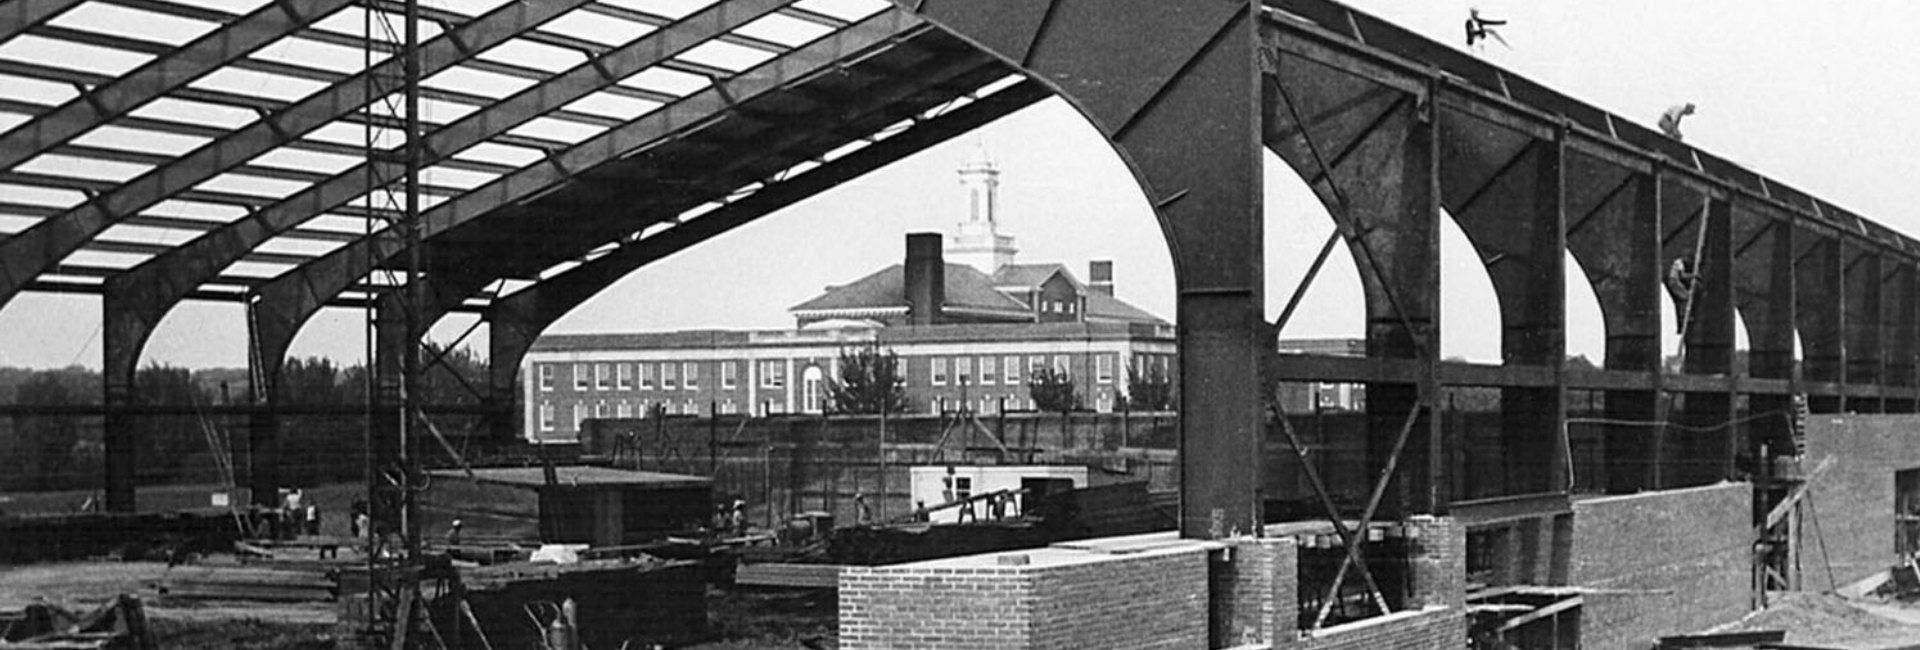 Construction of the fieldhouse from the west, in 1949